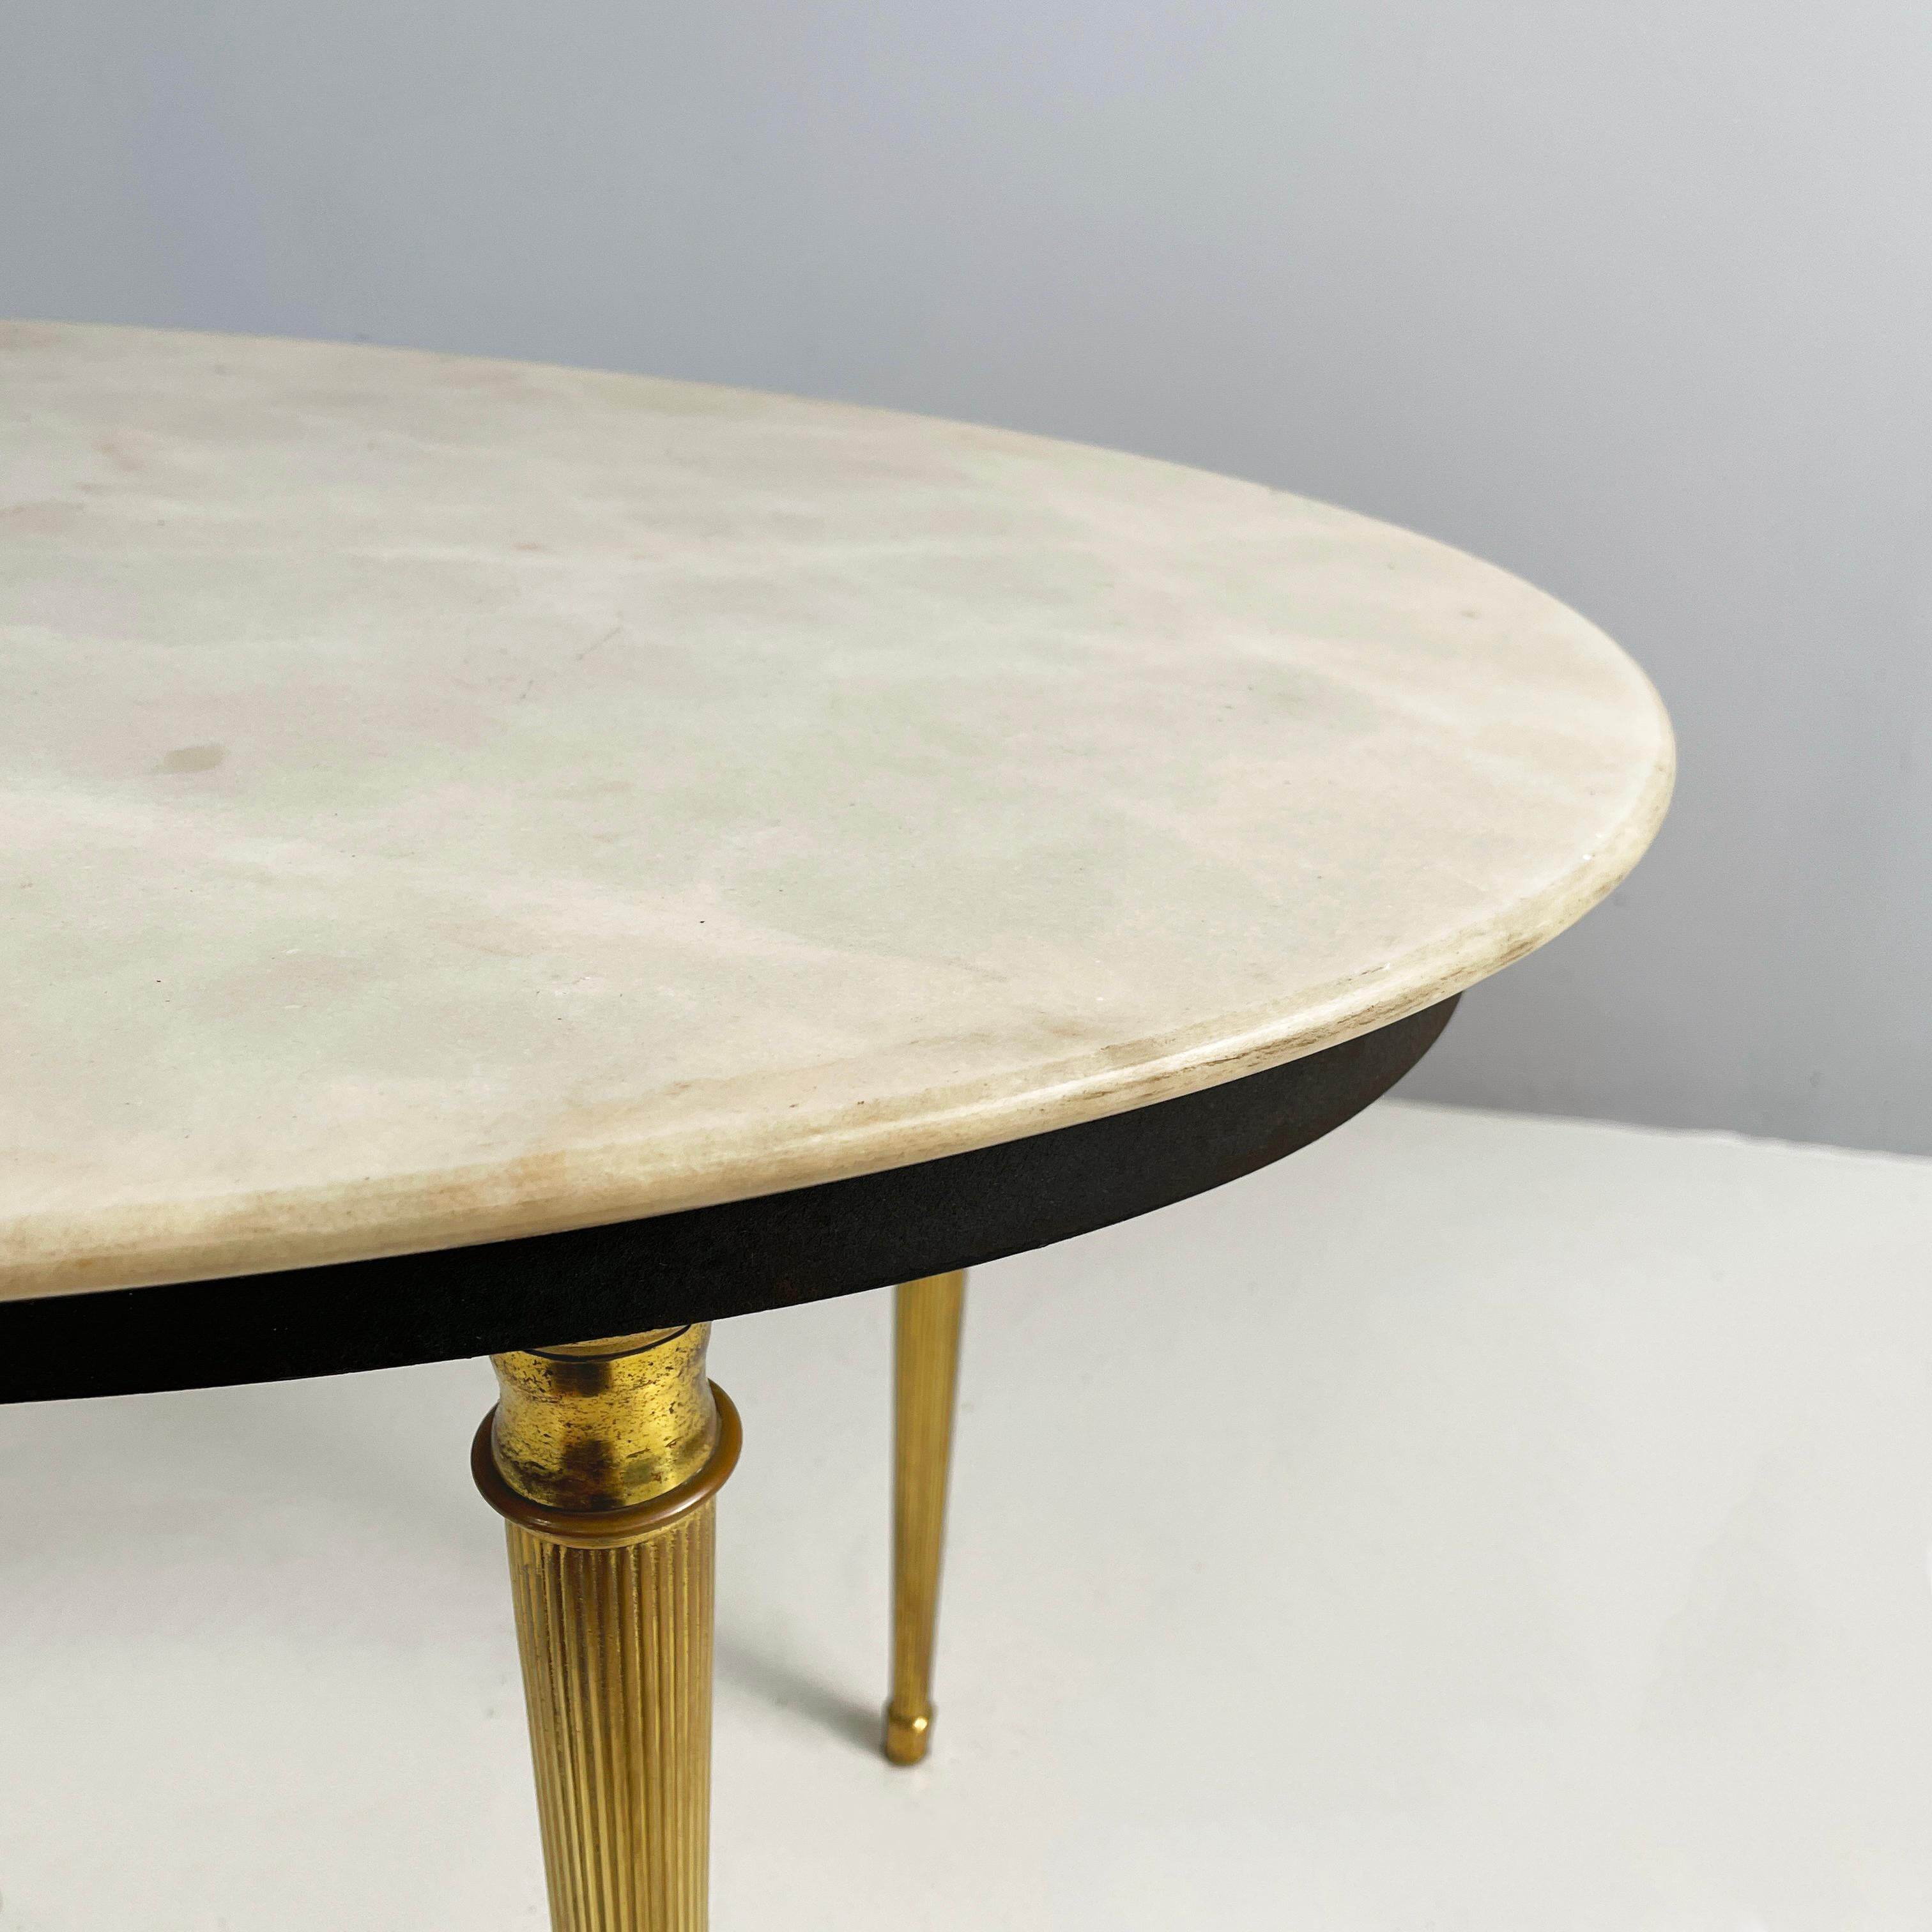 Italian mid-century modern Oval coffee table in light marble and brass, 1950s For Sale 1